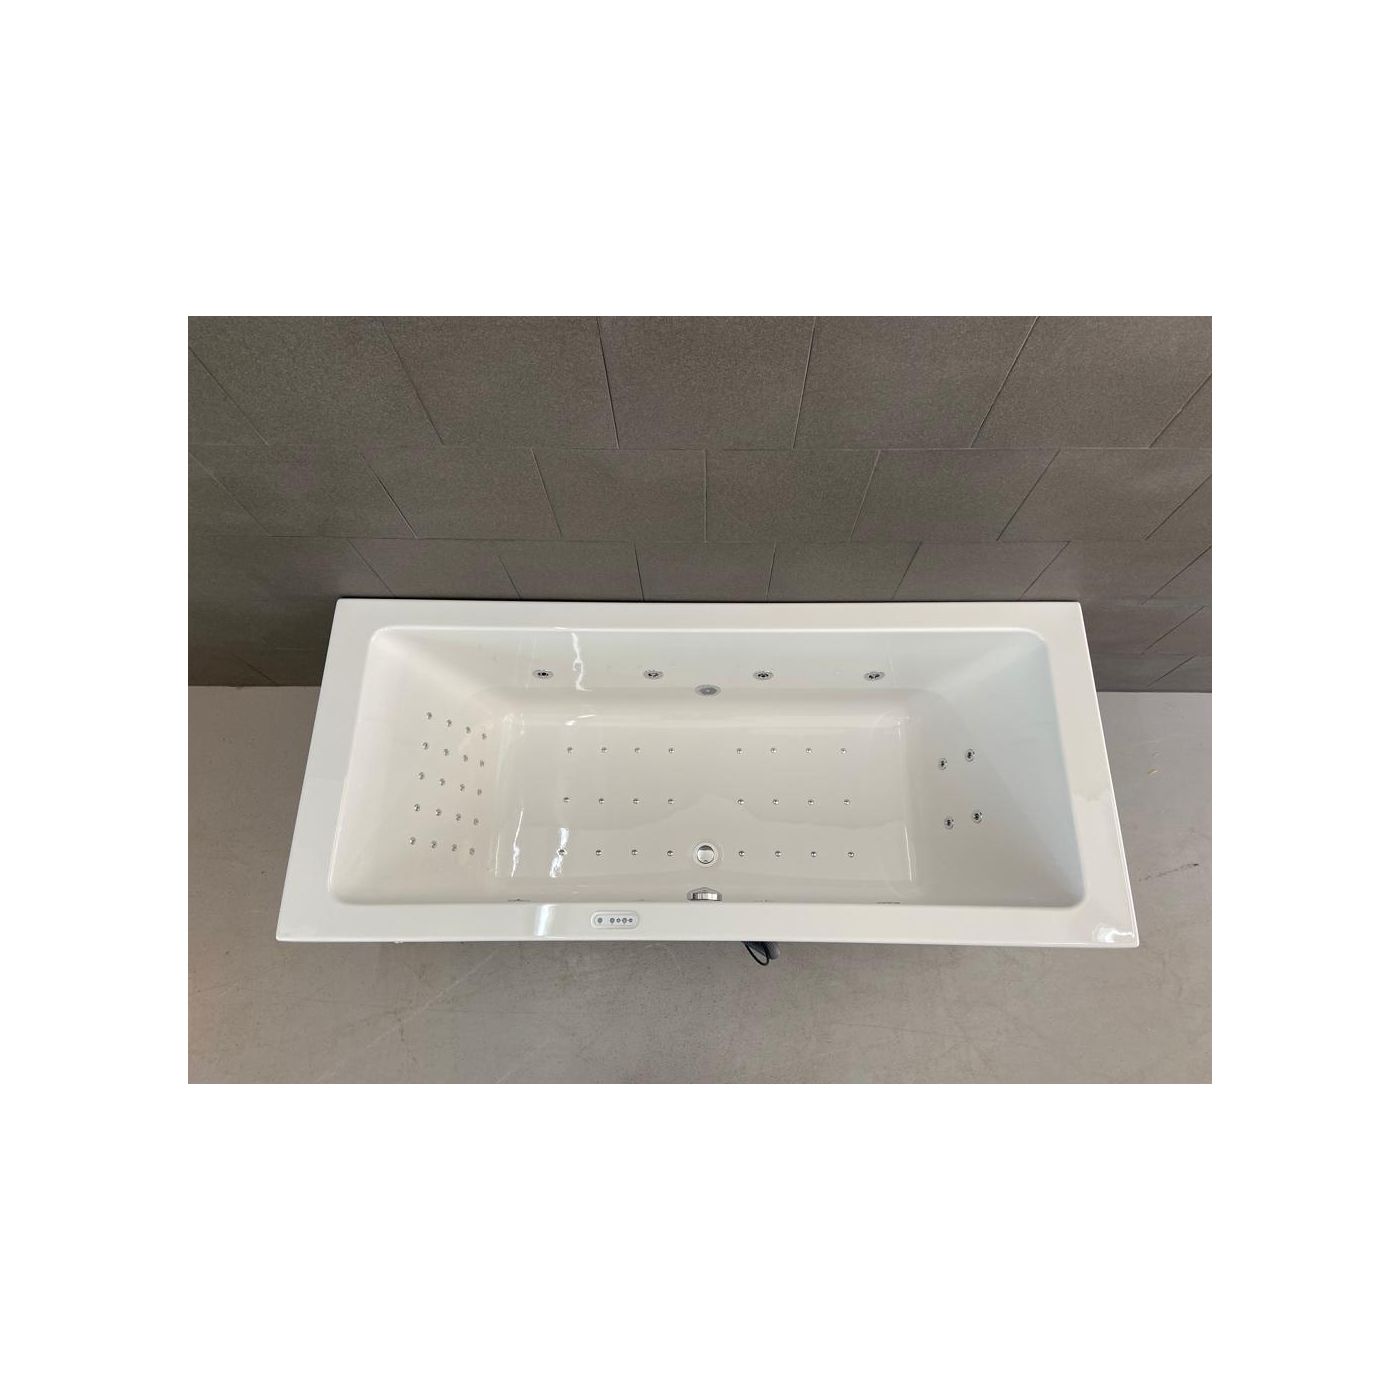 Xenz Society bubbelbad met Advance systeem 190x90 wit 24 bodemjets